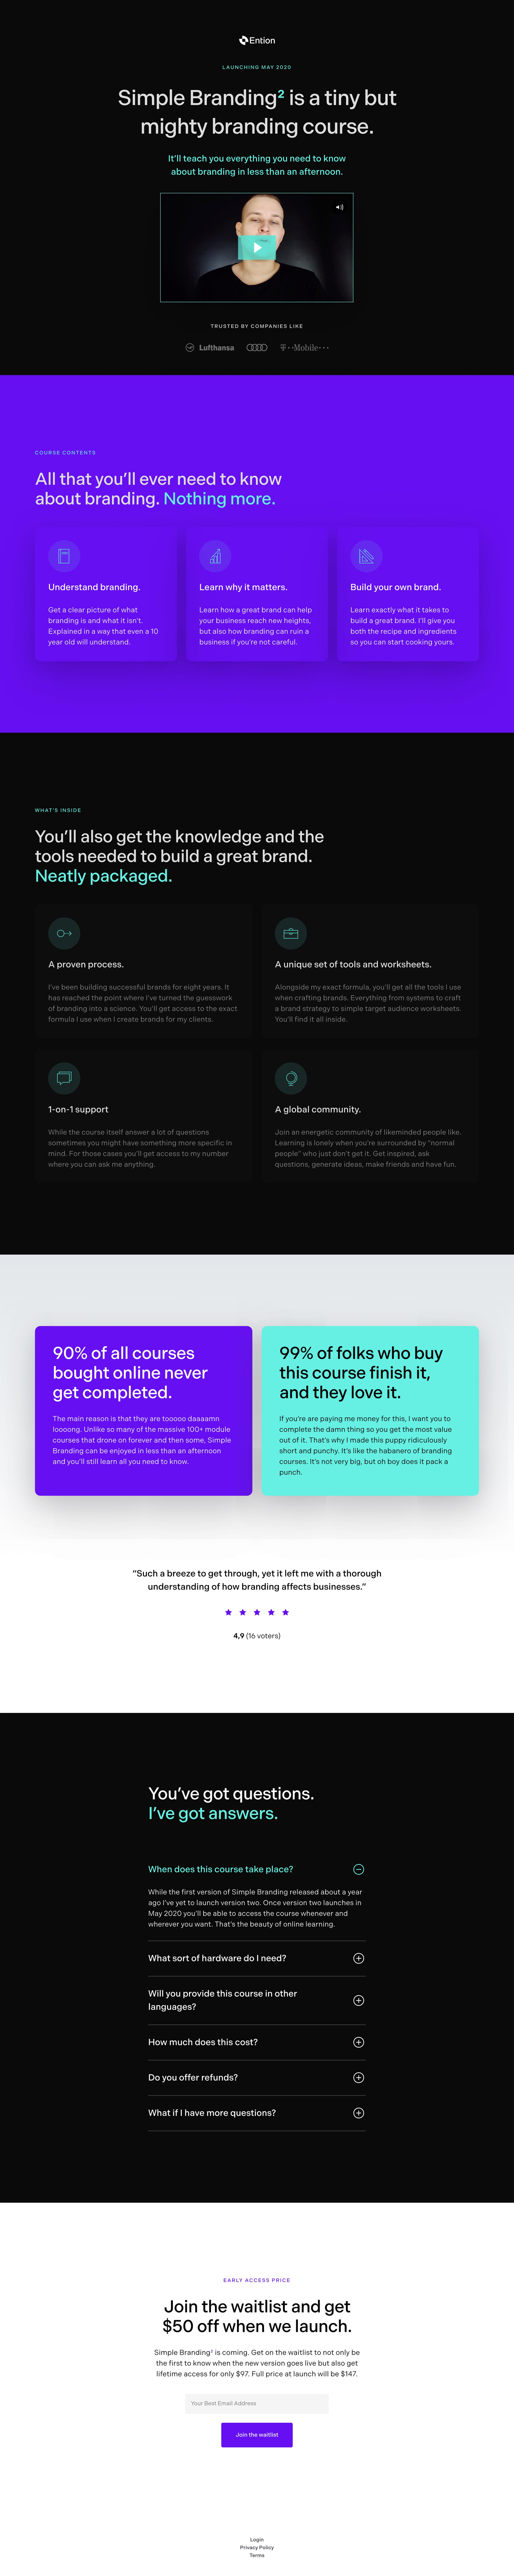 Simple Branding Course by Ention Website Screenshot